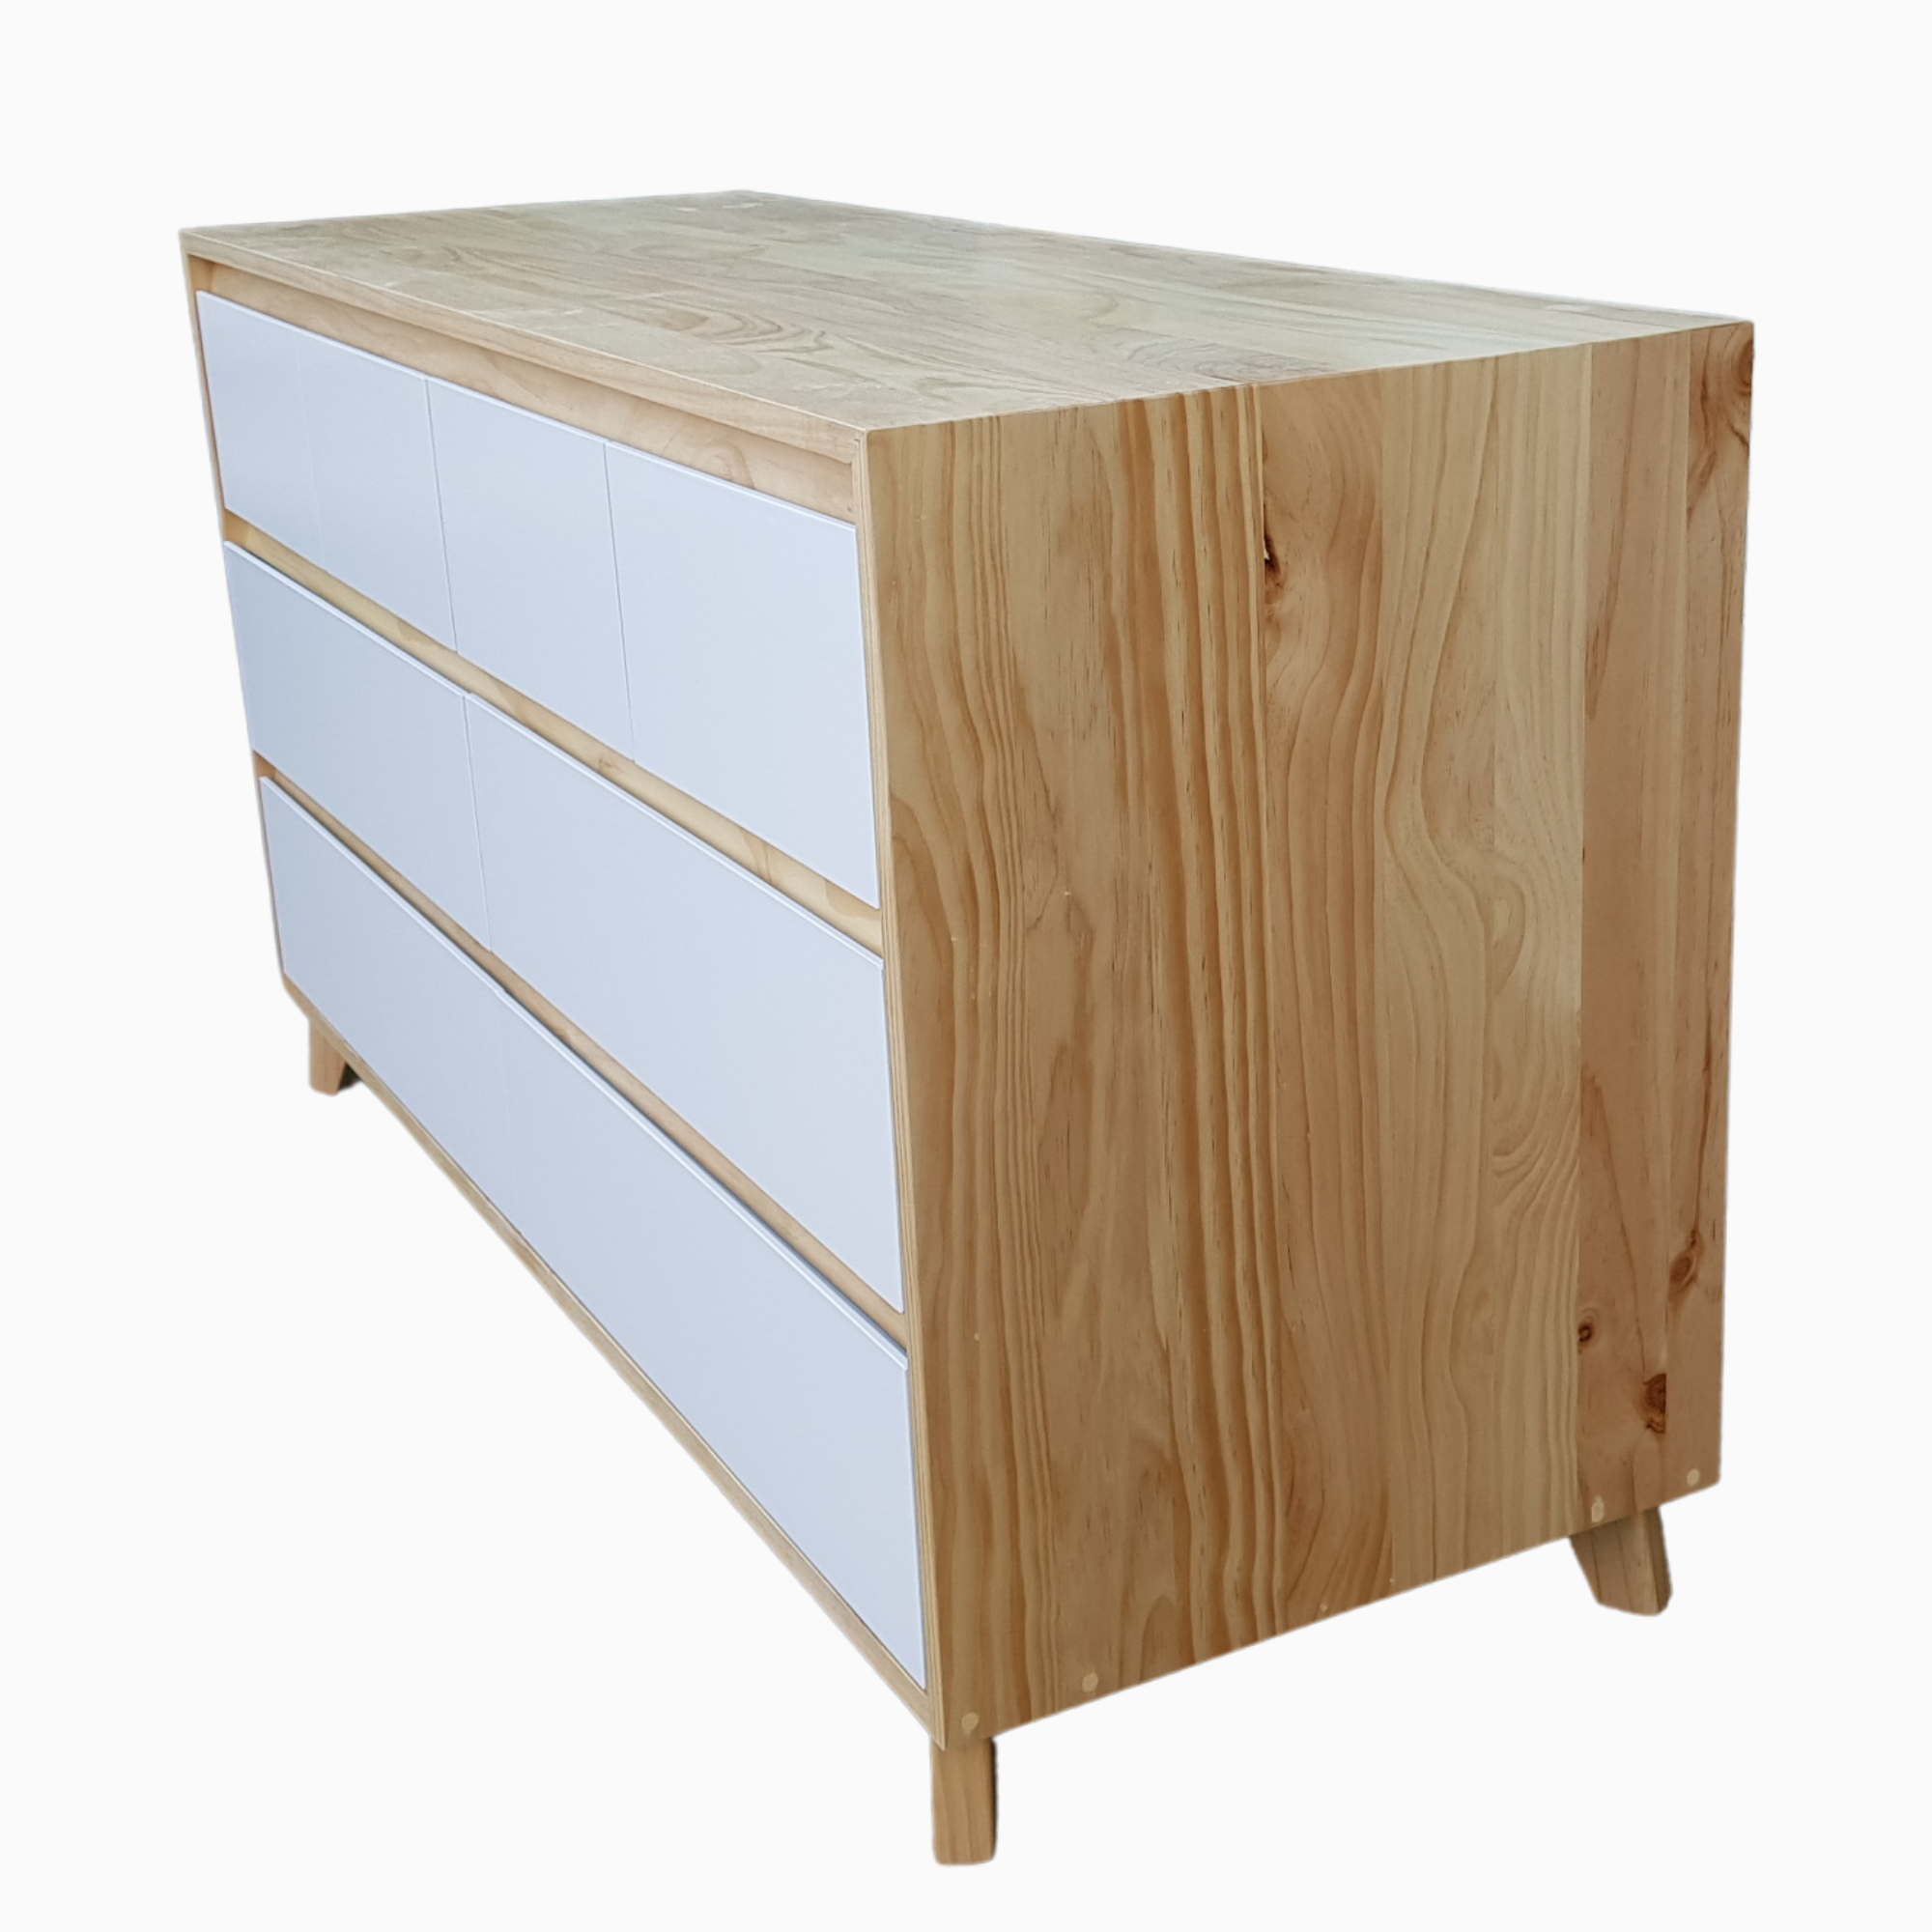 BRIMAR SOLID TIMBER 8 DRAWER LOWBOY WITH A DETACHABLE CHANGING TABLE